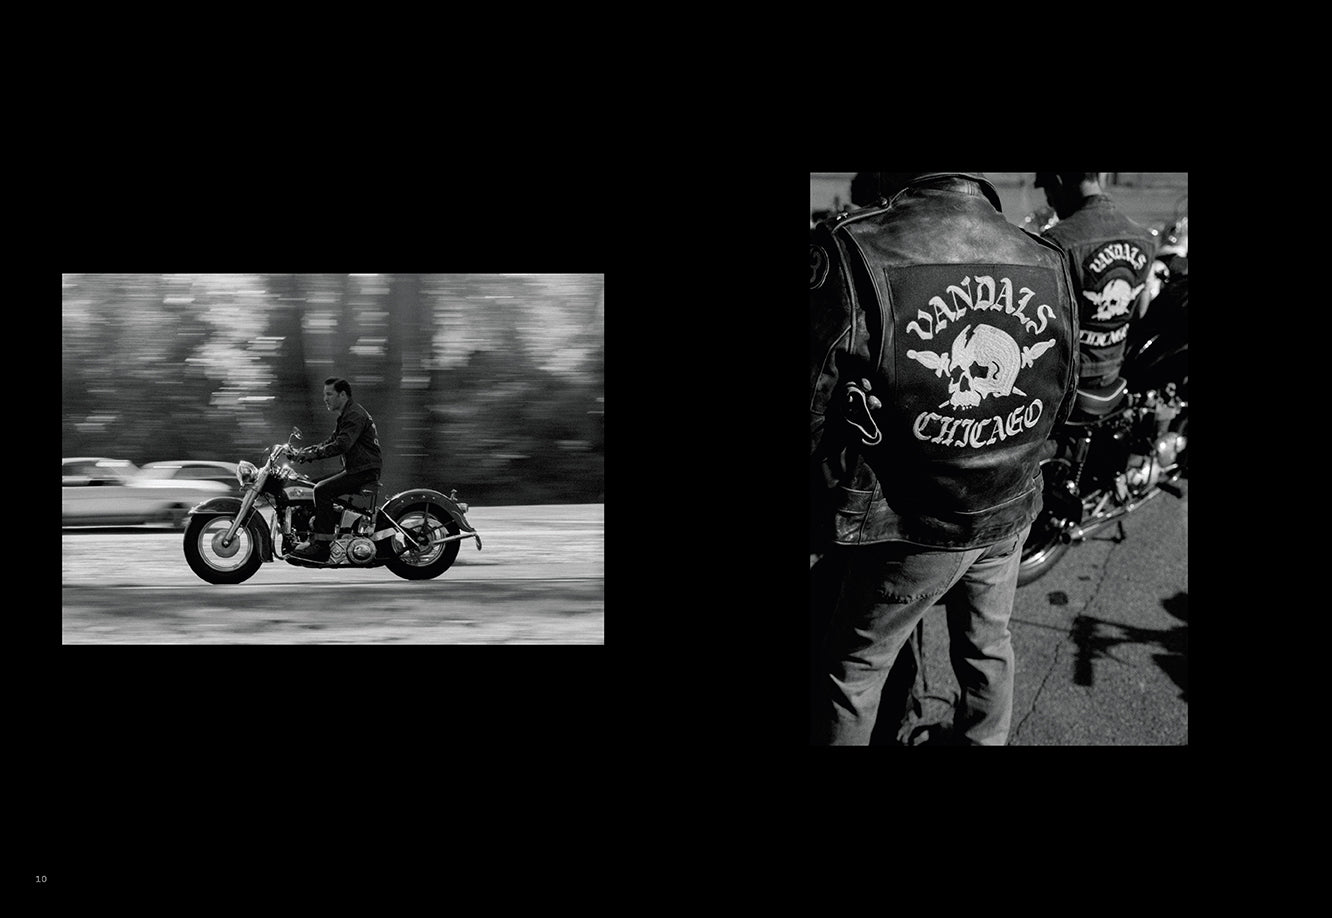 Vandals: The Photography of The Bikeriders: Tom Hardy